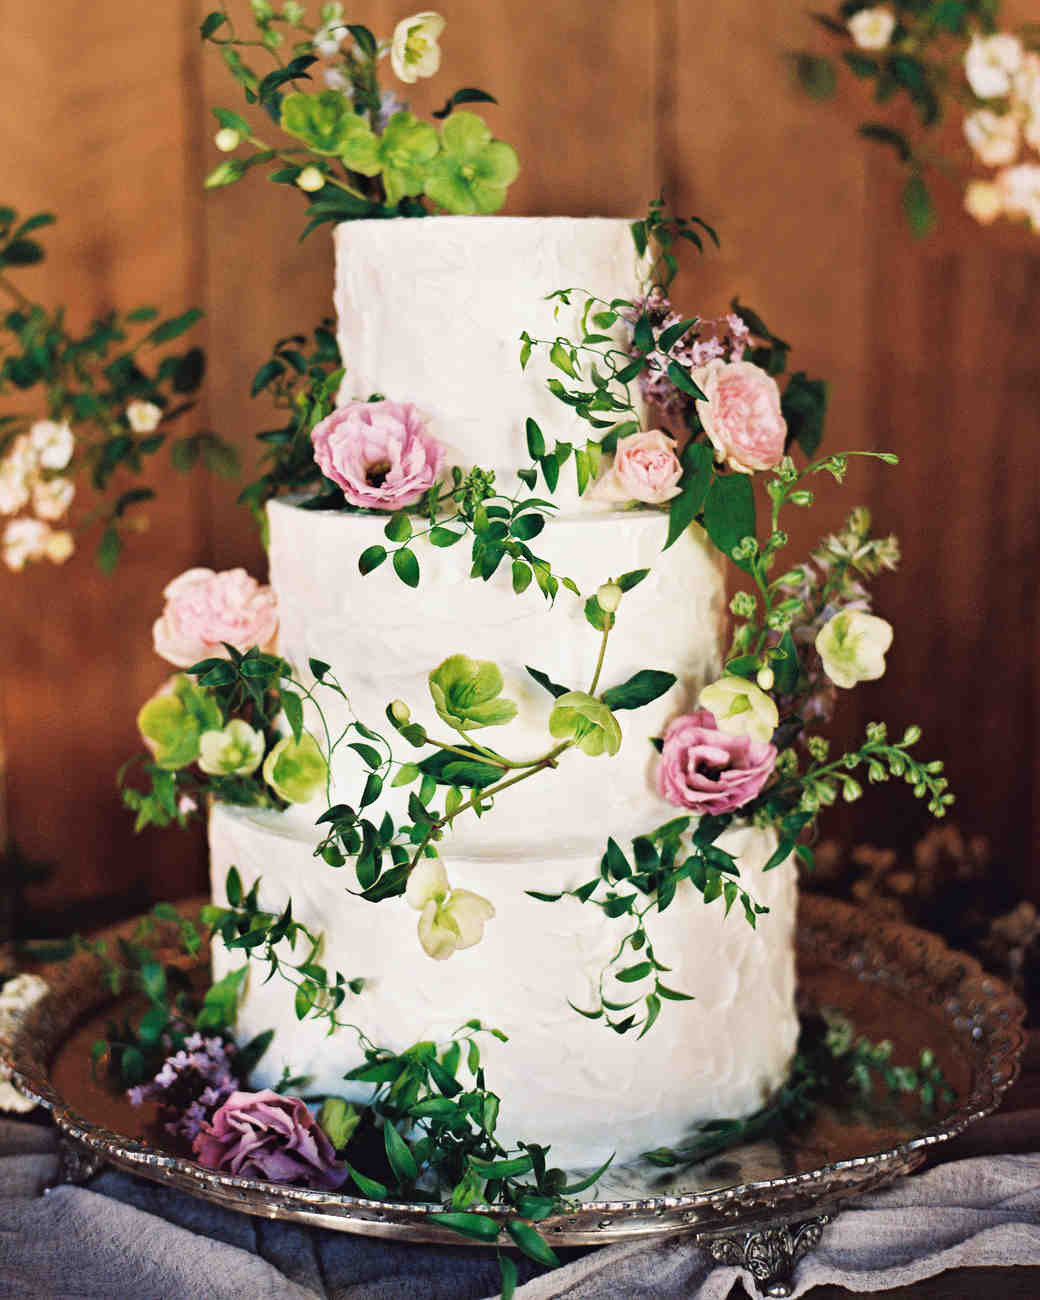 Wedding Cakes With Fresh Flowers
 44 Wedding Cakes with Fresh Flowers